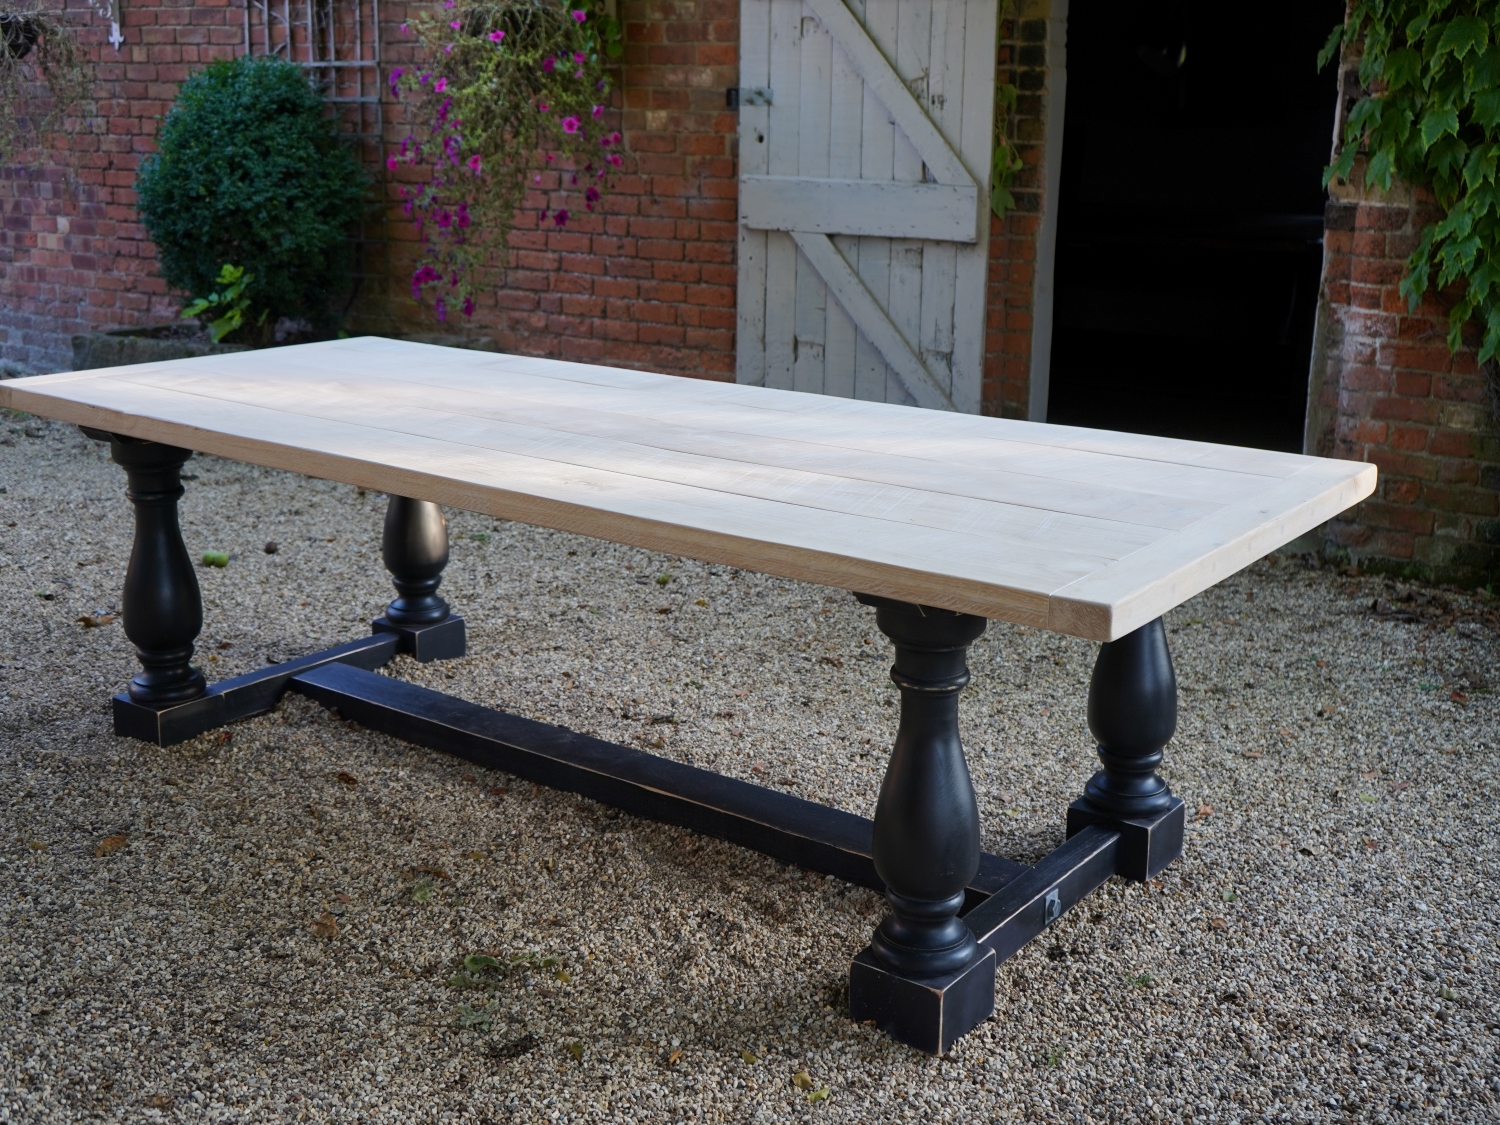 Solid Oak Top With Balustrade Leg